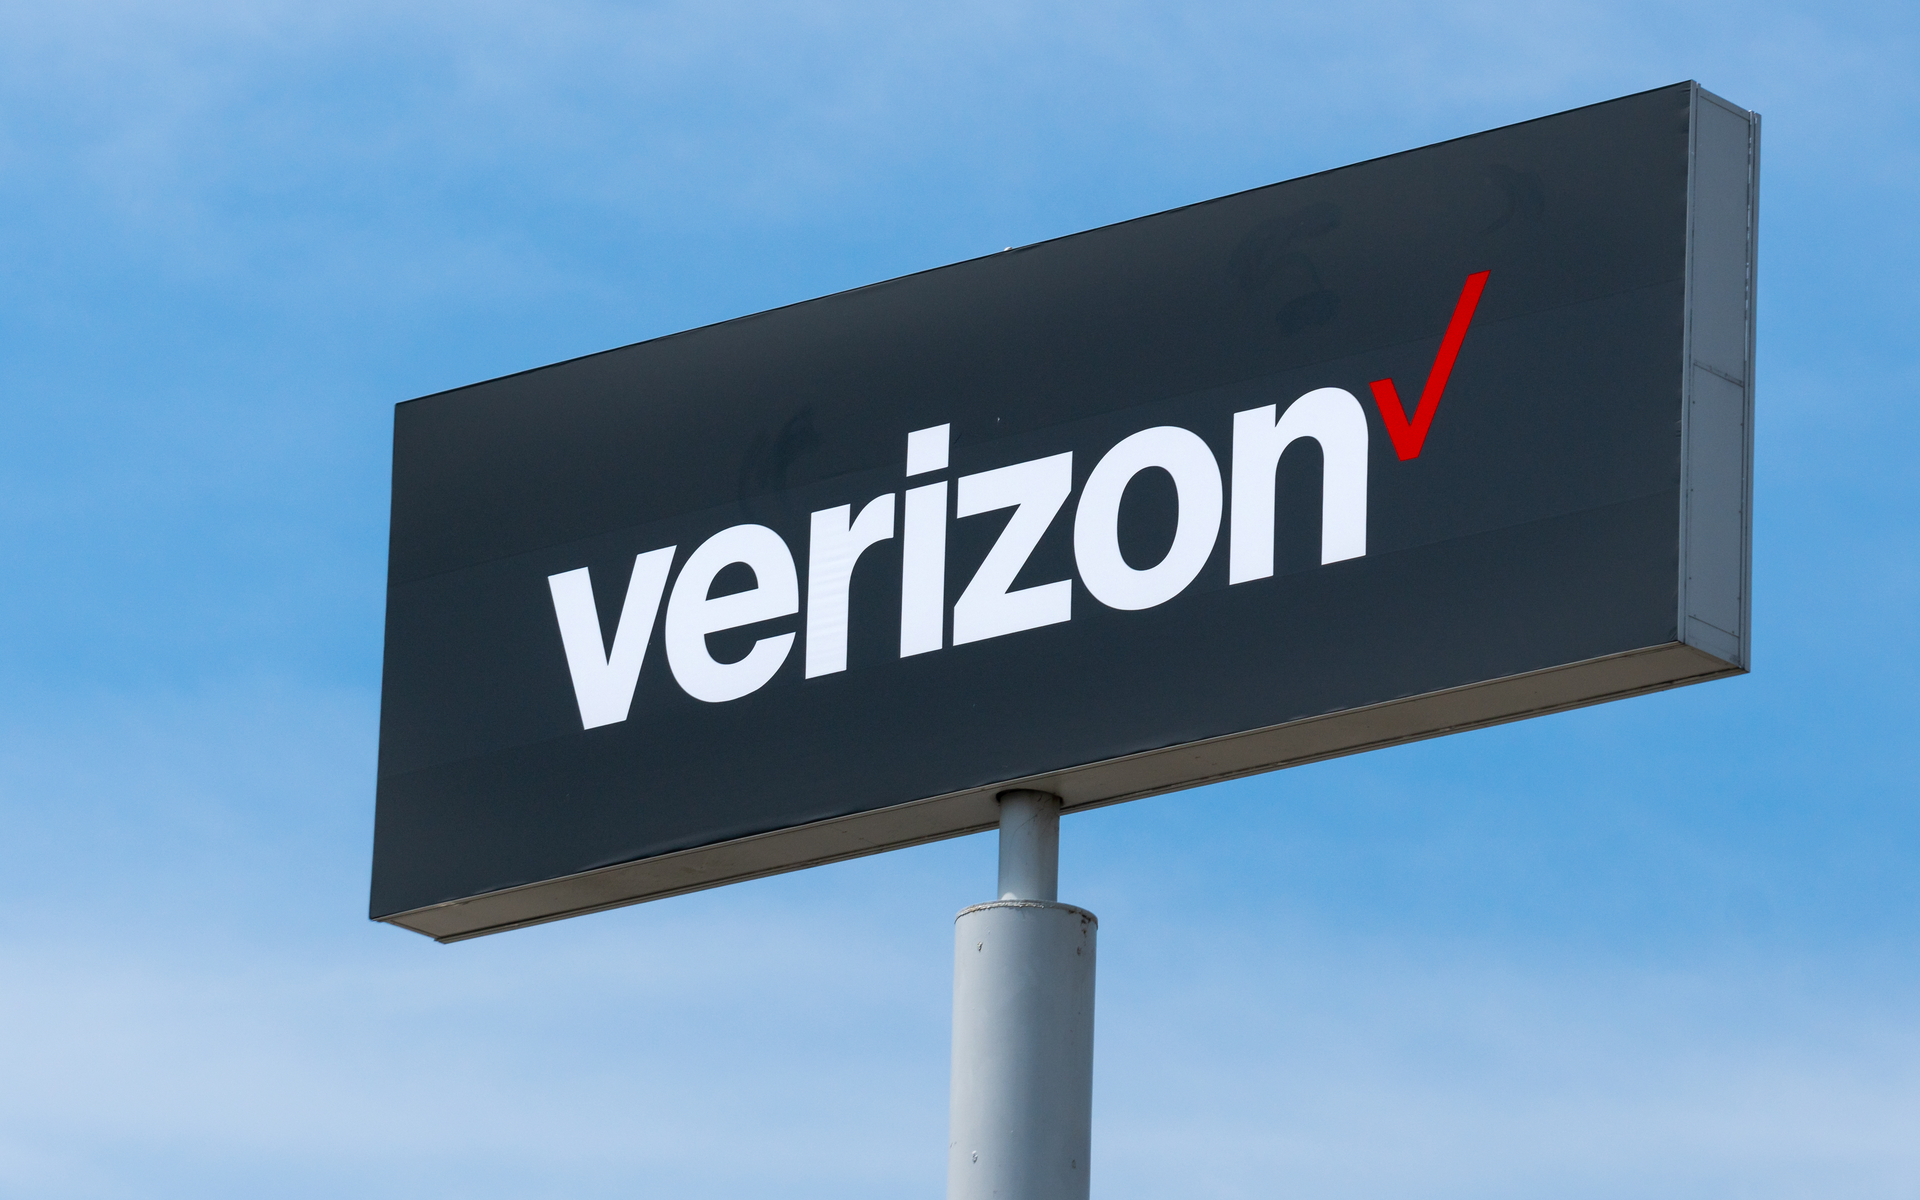 U.S. telecom giant Verizon appears ready to join the blockchain space as it...